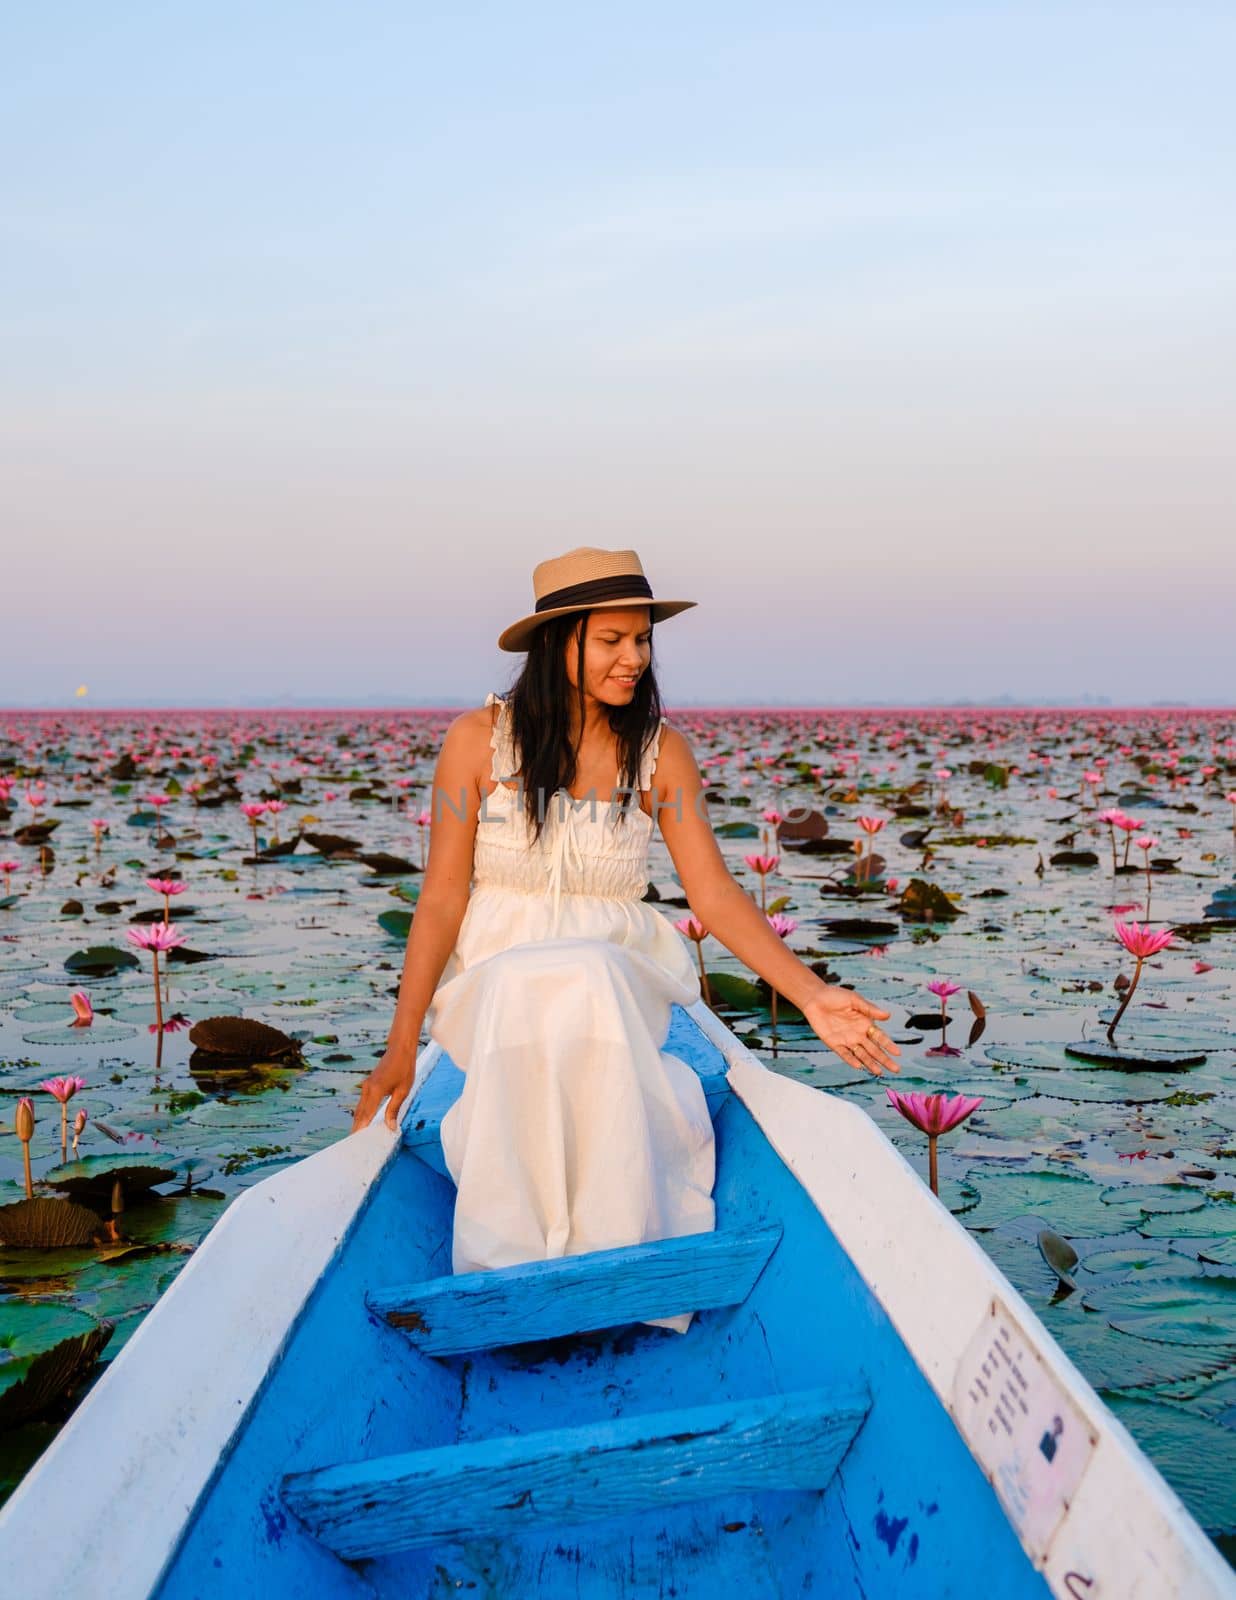 Thai women in a boat at the Red Lotus Sea Kumphawapi full of pink flowers in Udon Thani Thailand. by fokkebok